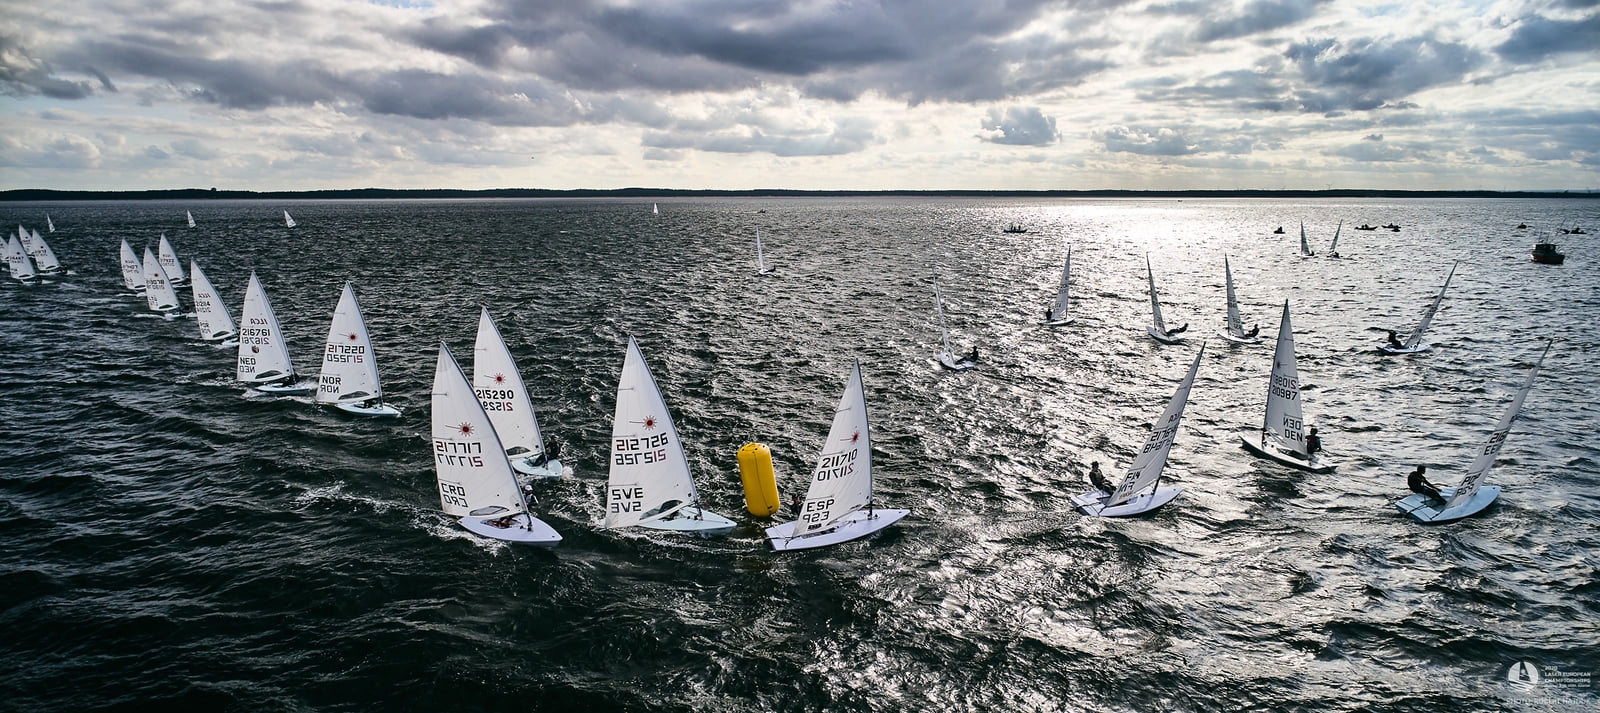  Laser Radial + Standard  European Championship 2020  Gdansk POL  Day 1, with CAN, MEX and USA participants